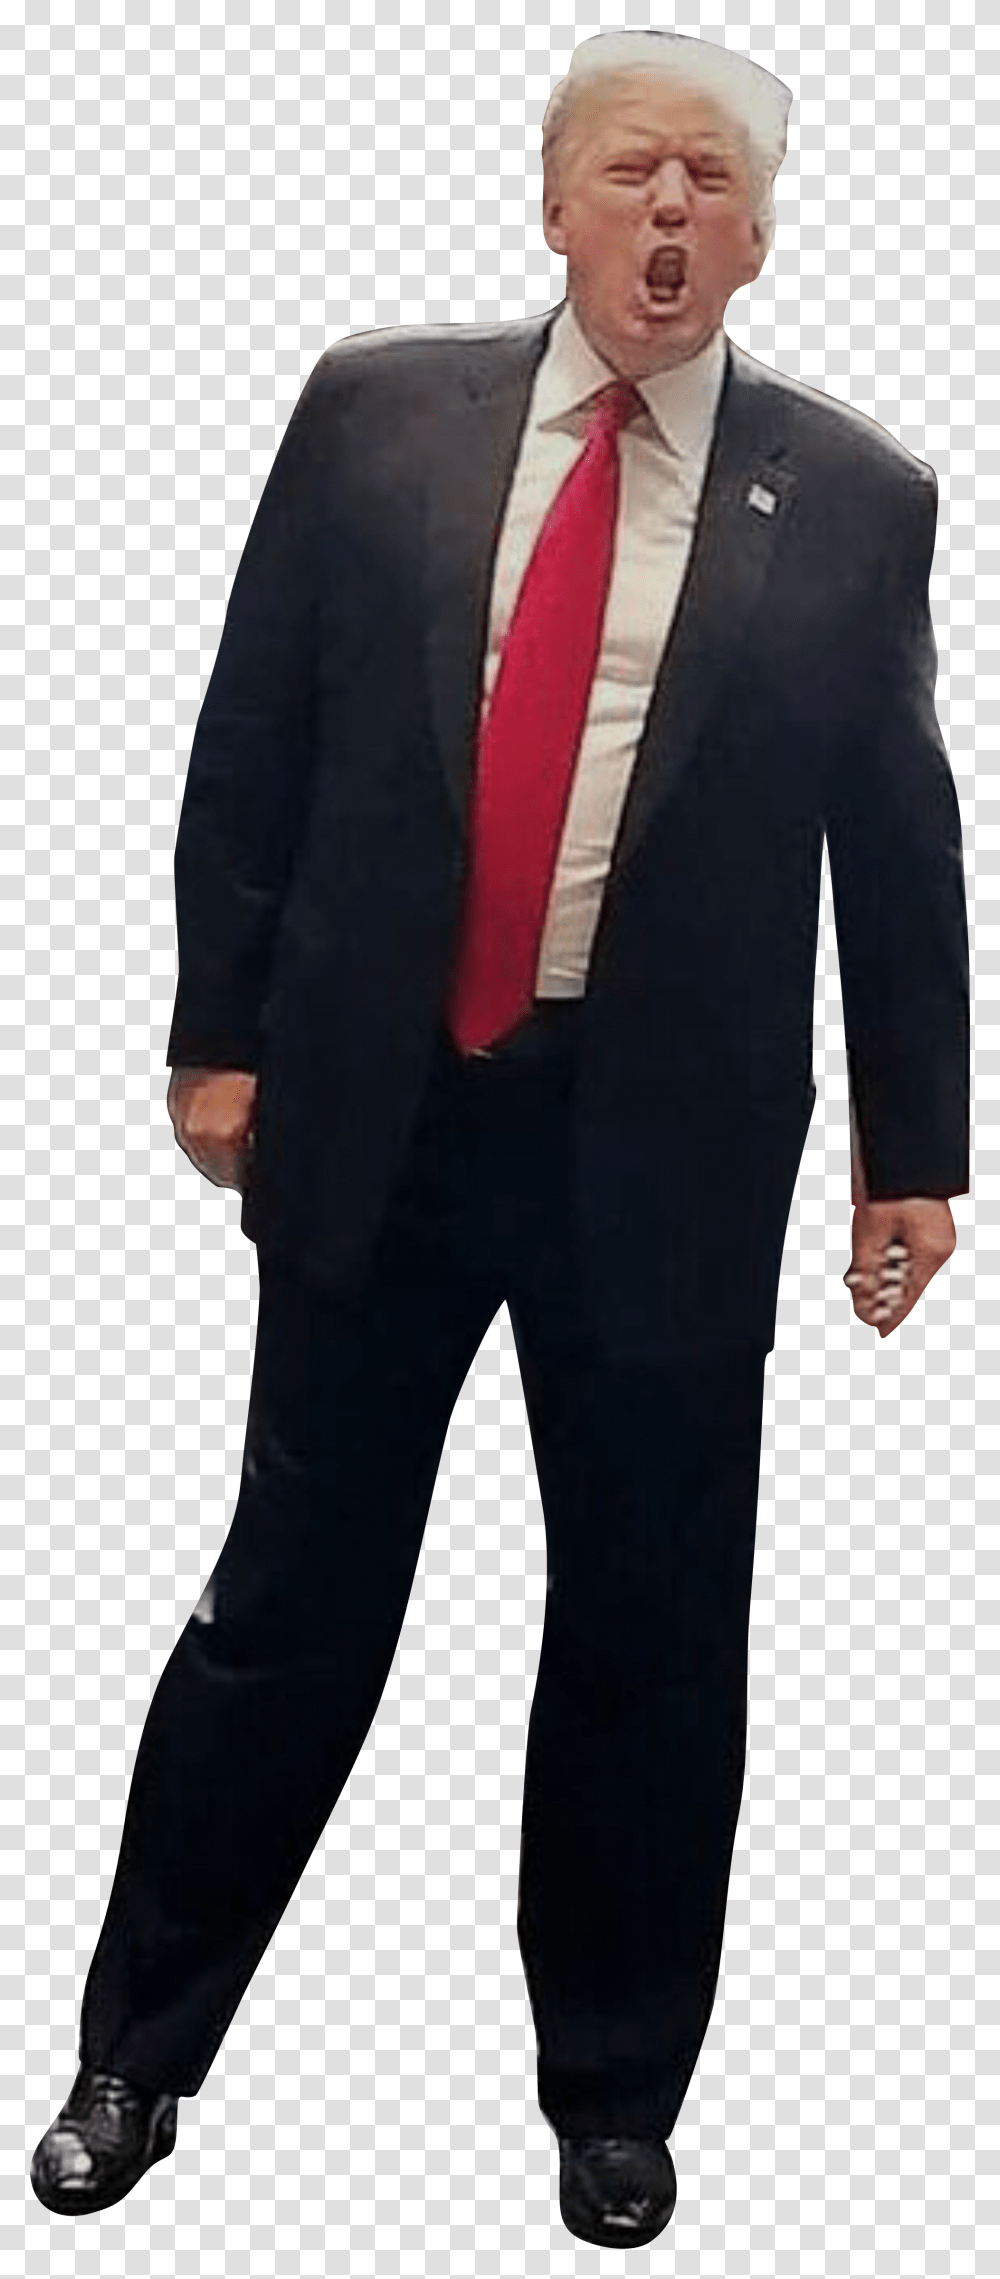 Person Yelling Man Yelling, Apparel, Suit, Overcoat Transparent Png